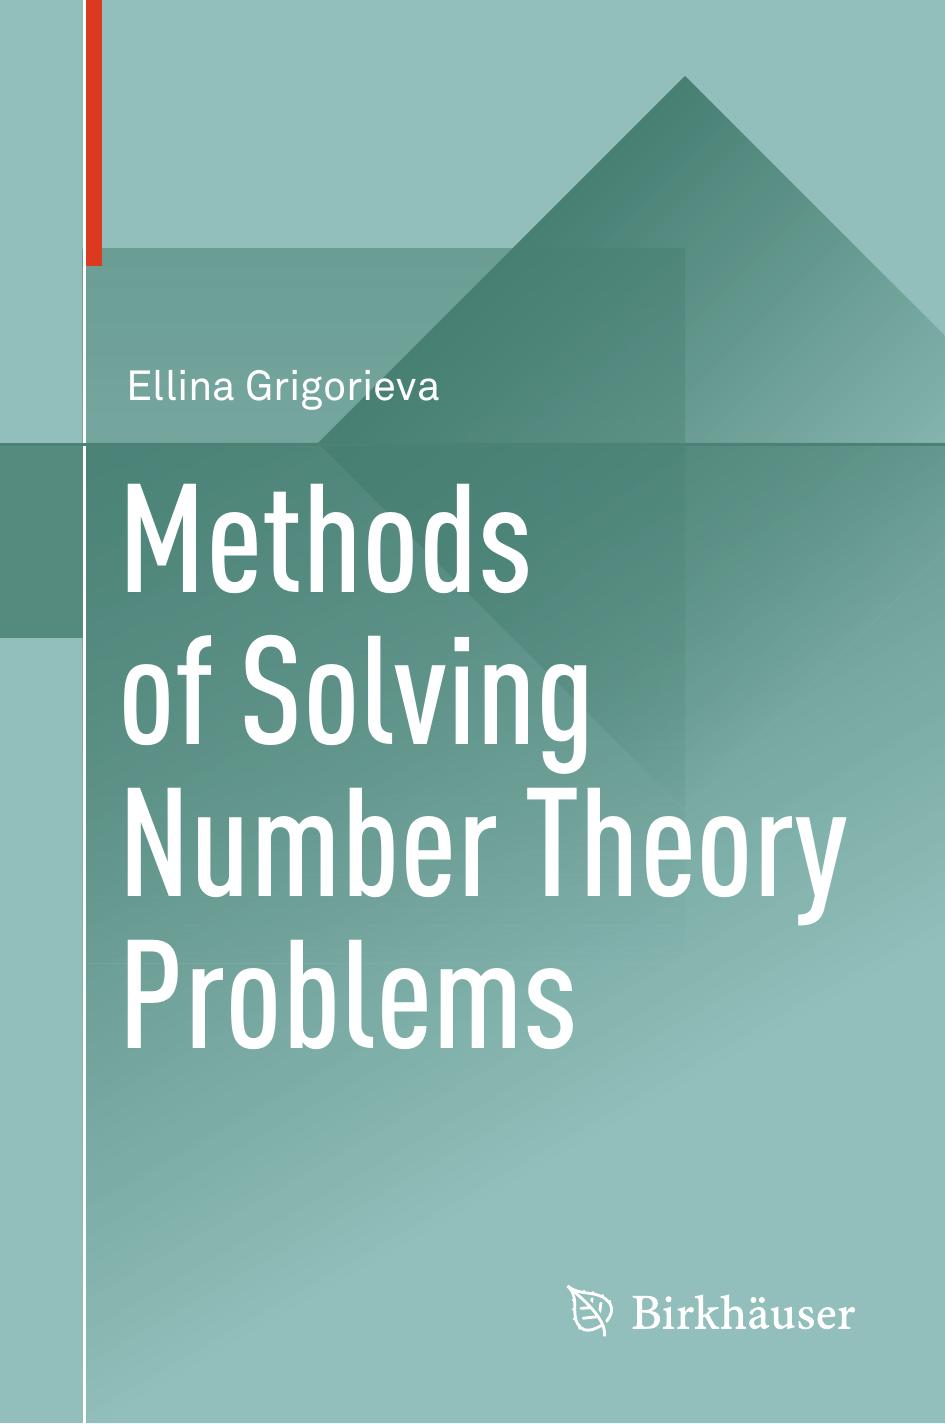 Methods of solving number theory problems 2018